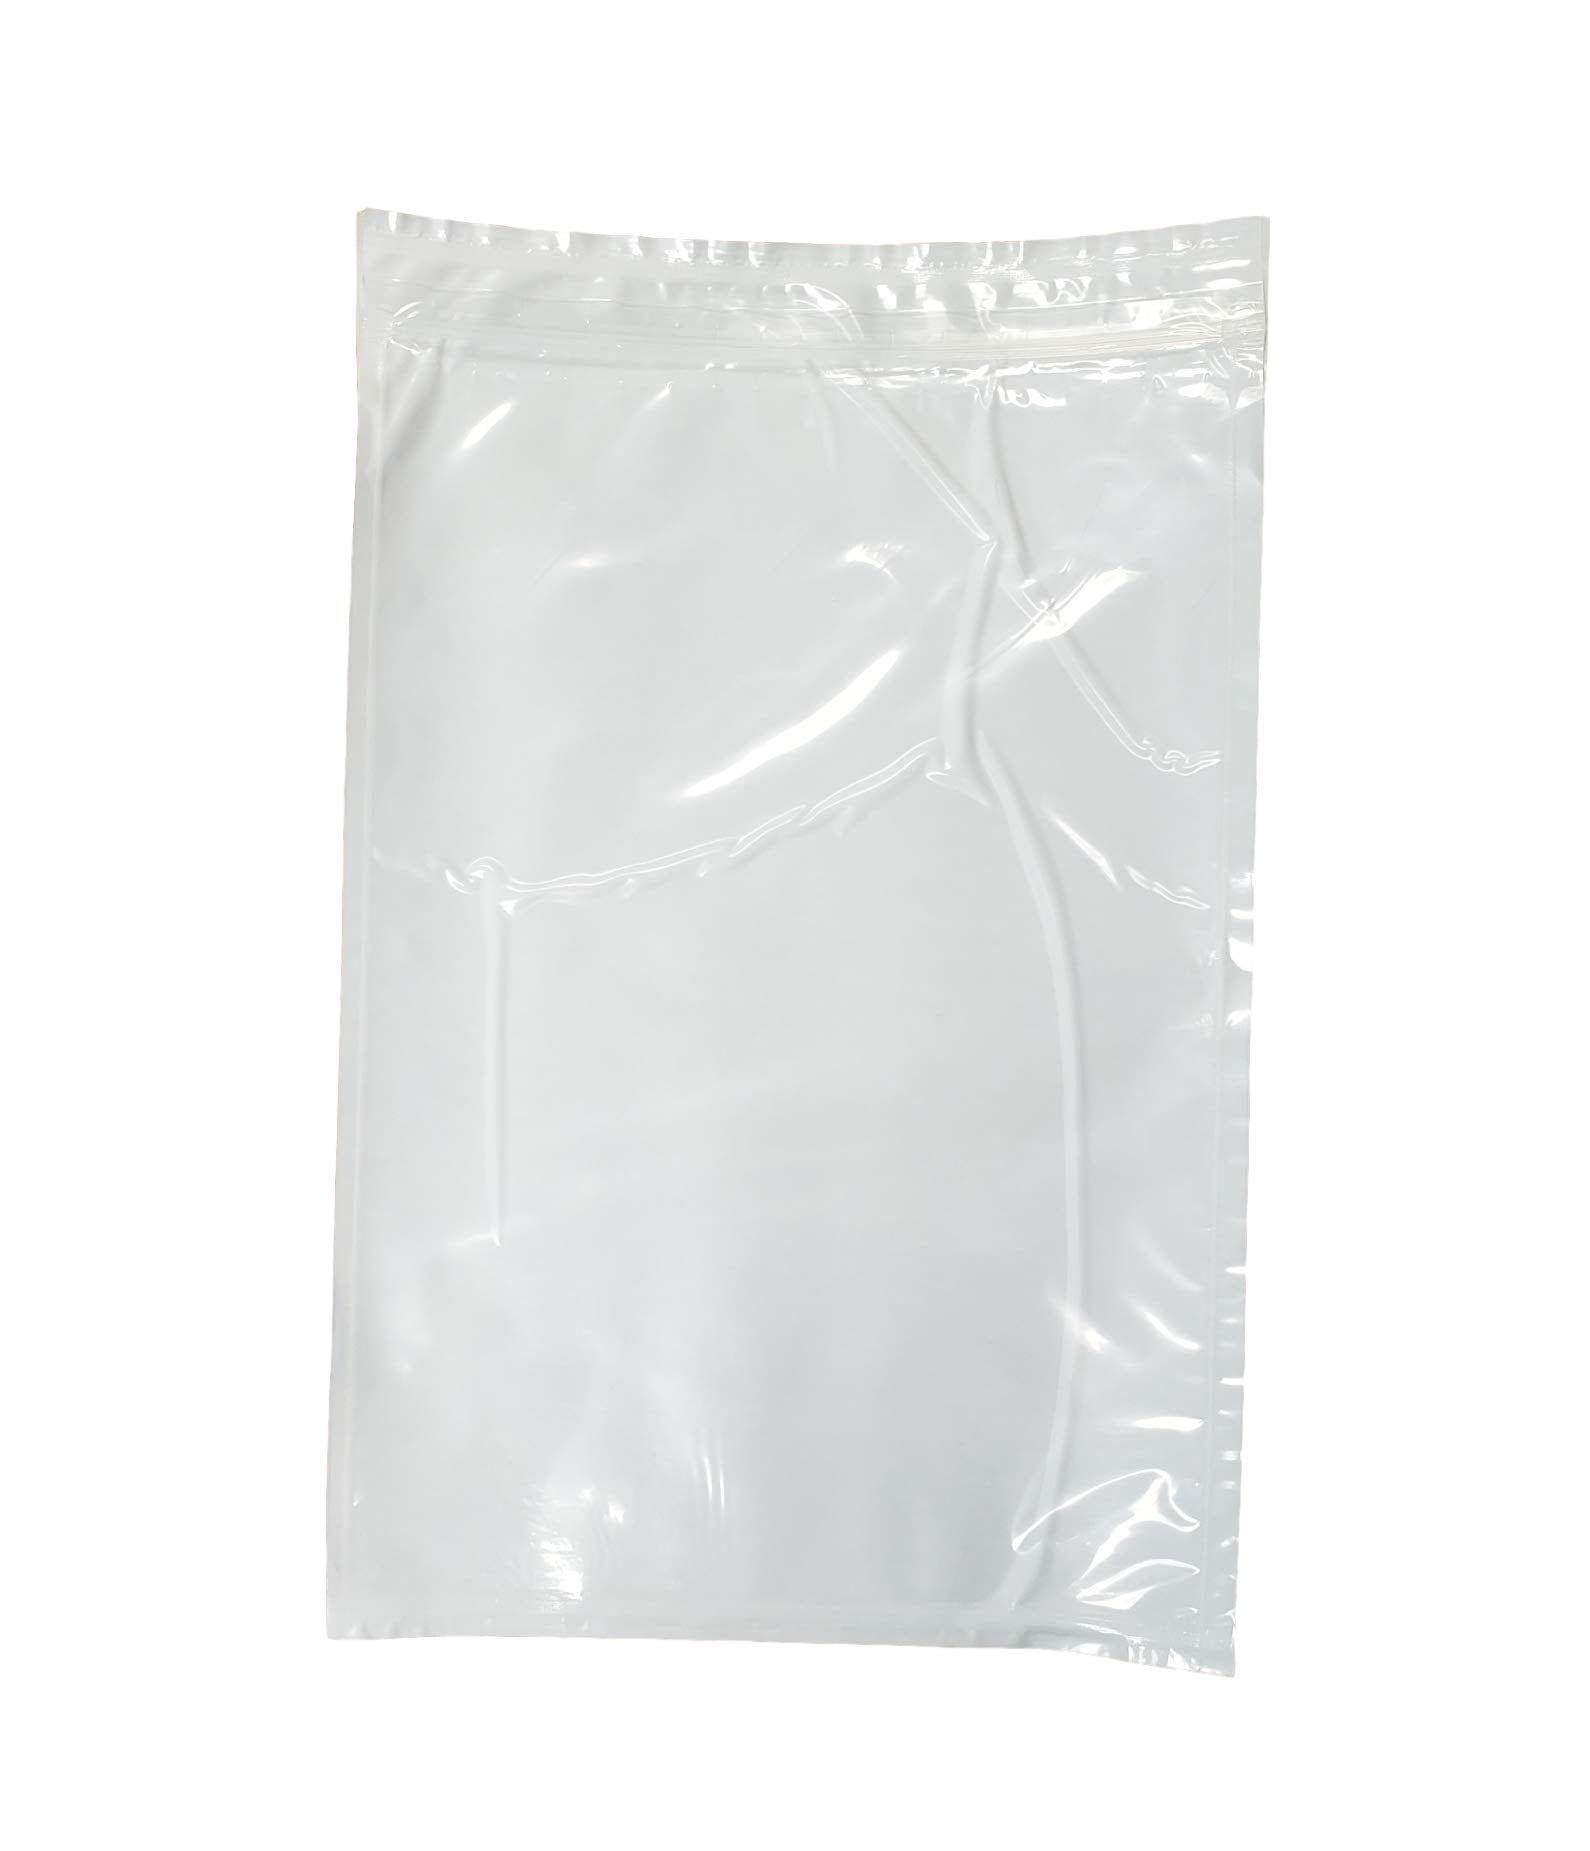 MT Products Clear Plastic 4 1/2 x 6 Blank Packing List/Document Envelope Pouch 100 Pieces 